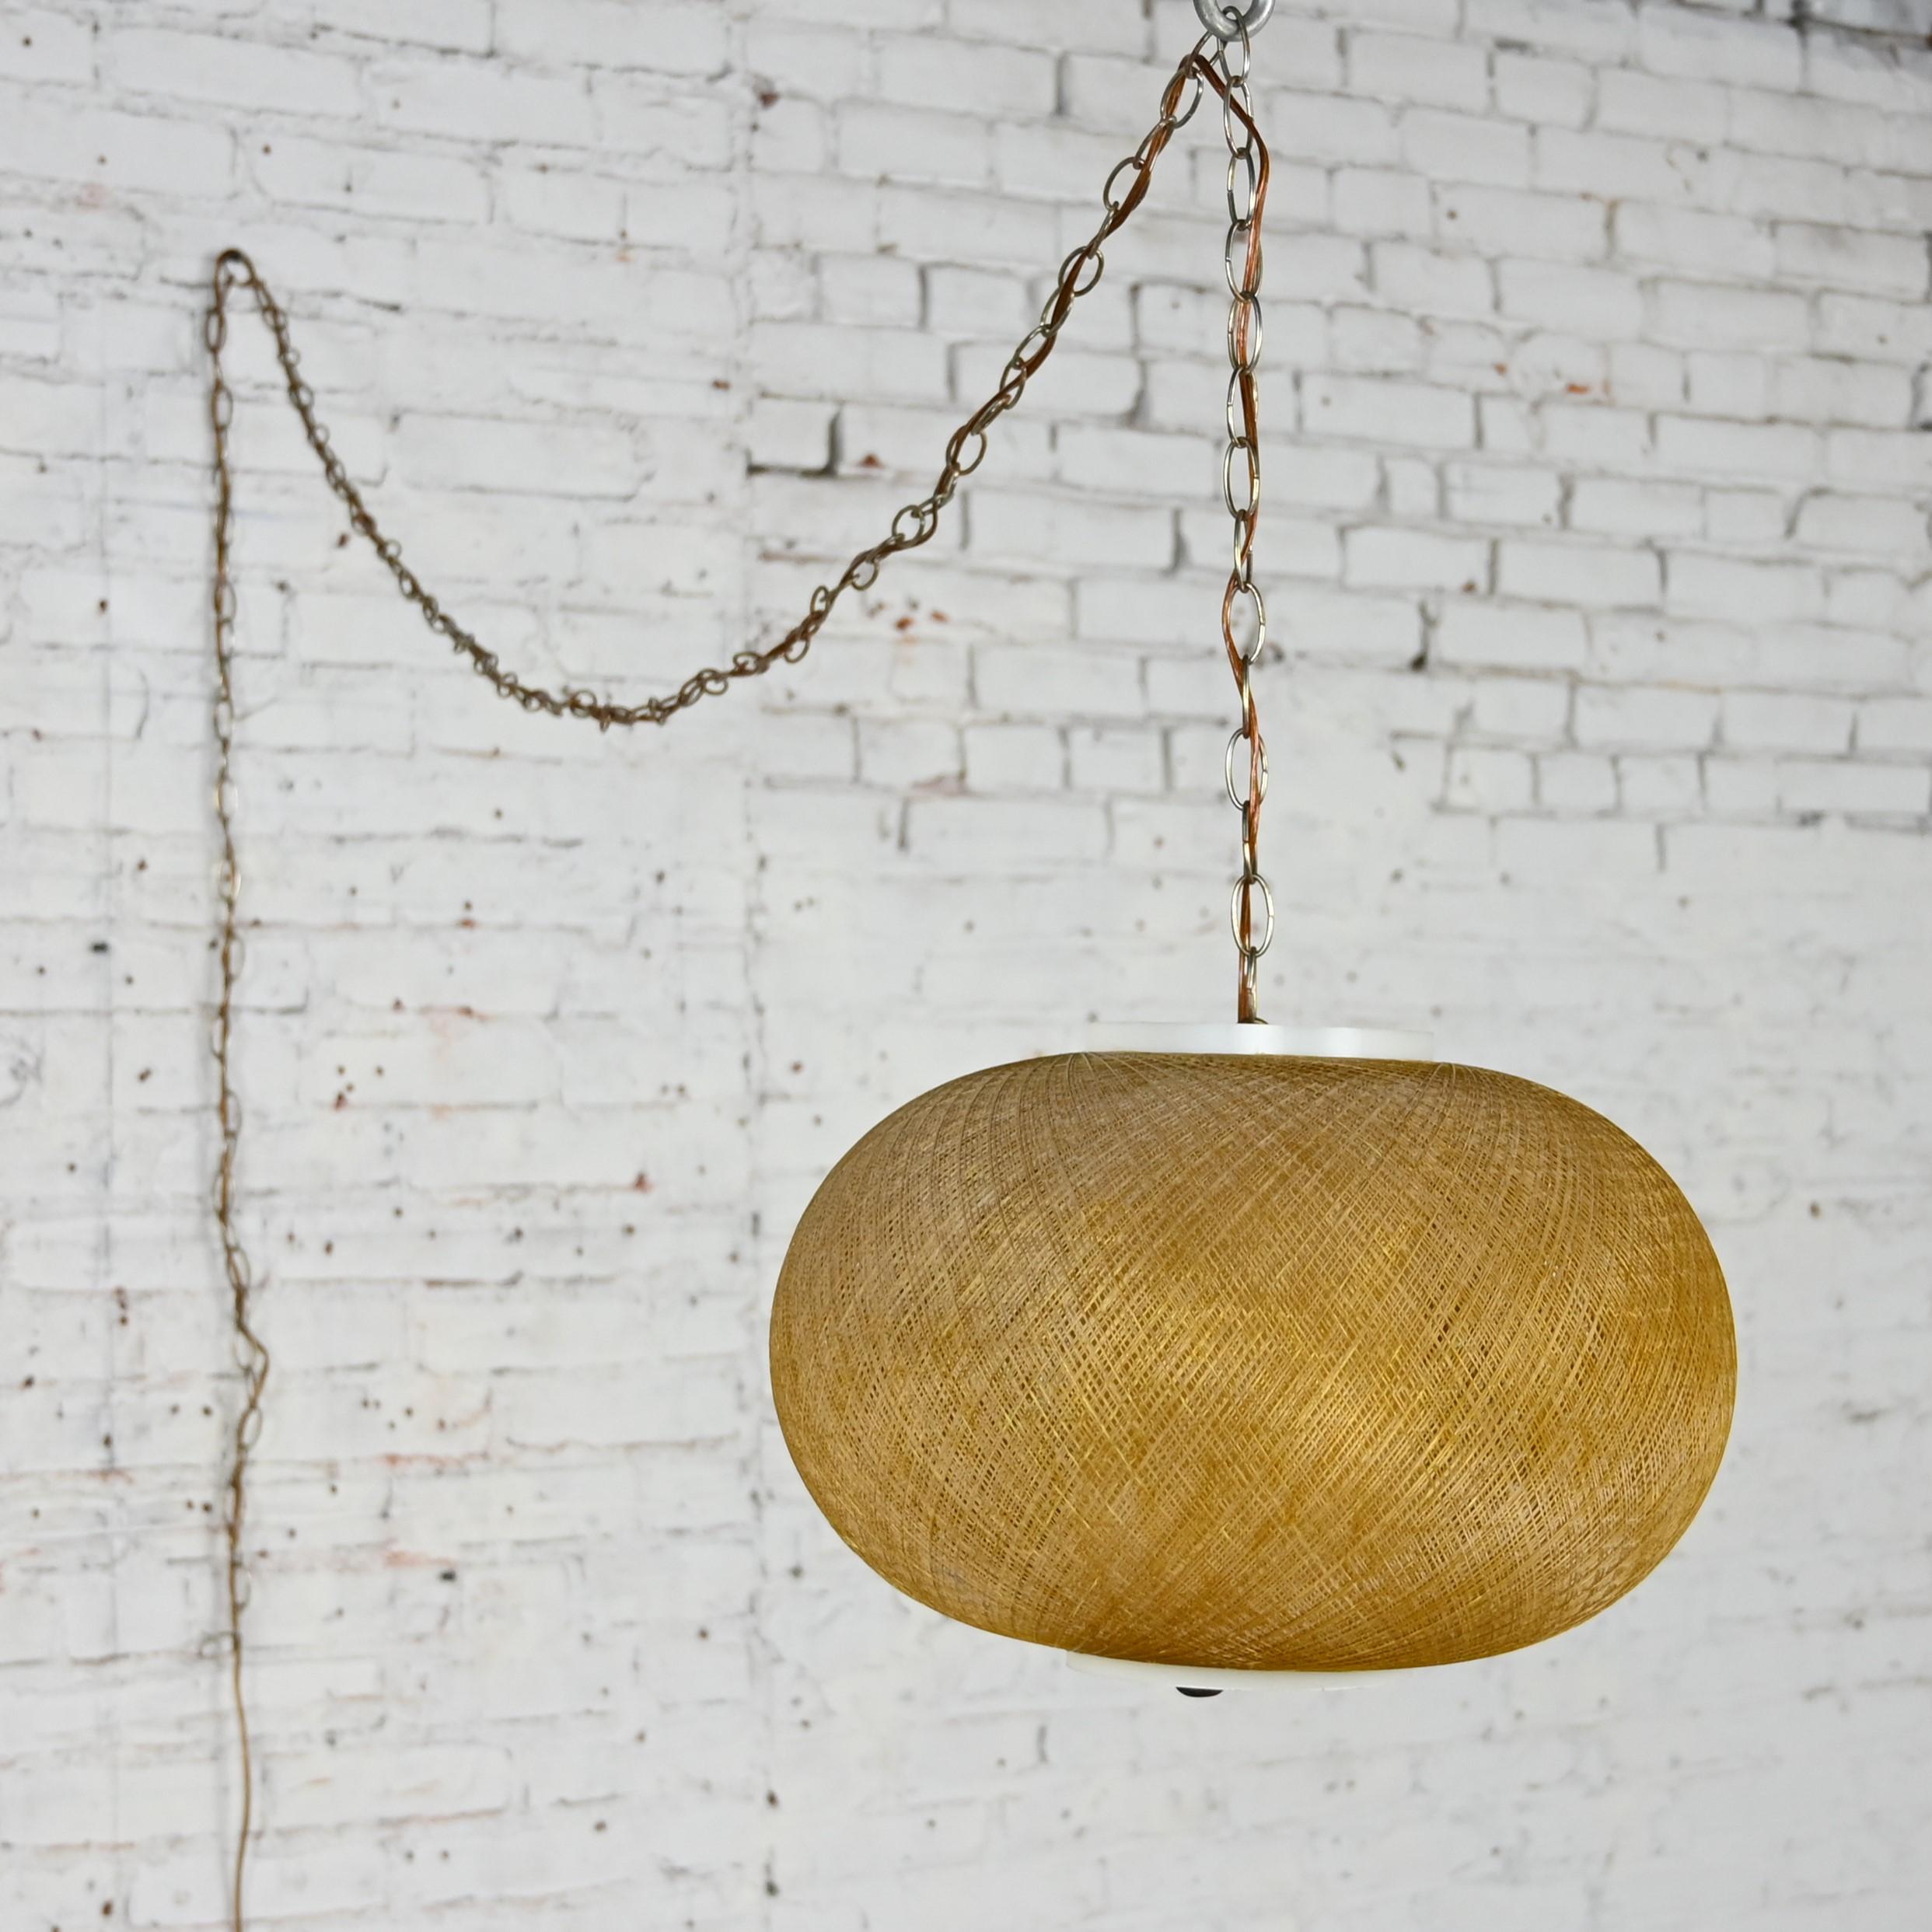 Gorgeous Mid-20th Century Mid Century Modern gold spun fiberglass string swag or pendant hanging light fixture or lamp.  Beautiful condition, keeping in mind that this is vintage and not new so will have signs of use and wear even if it has been